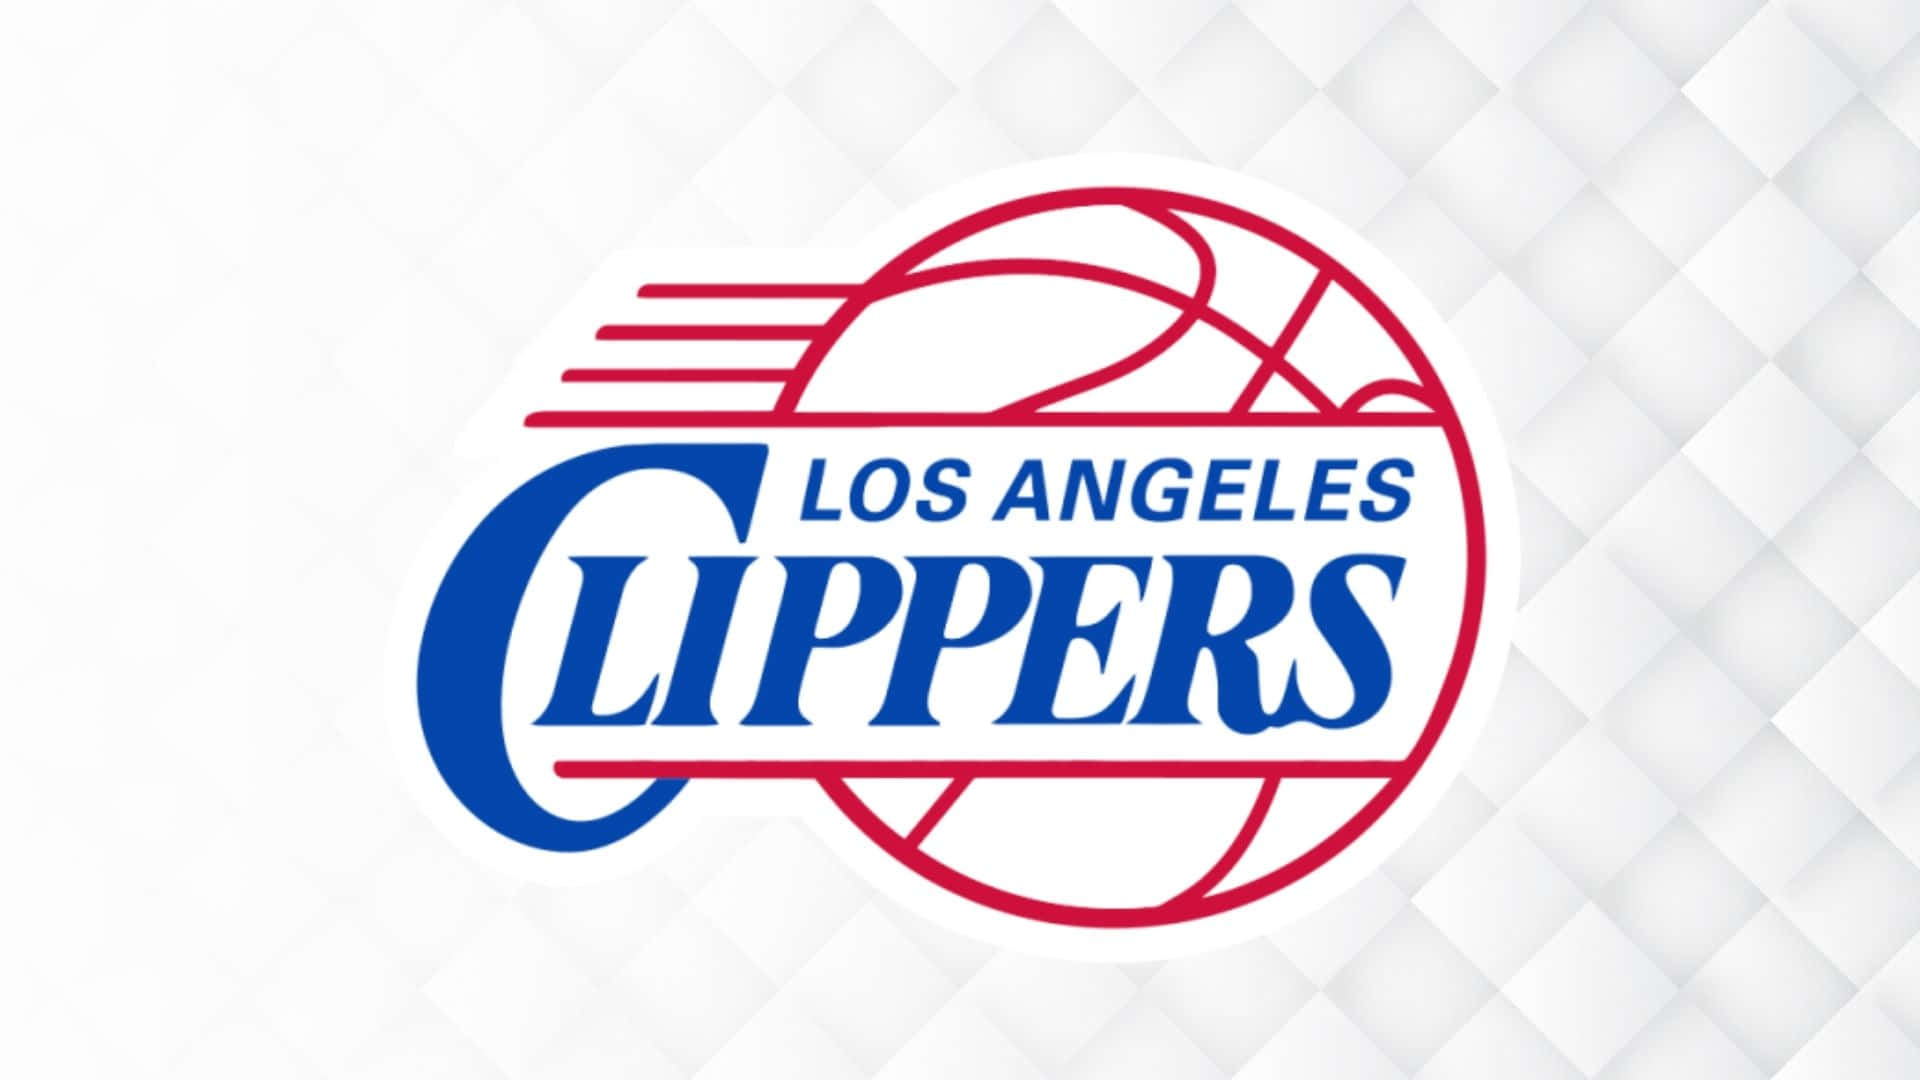 Losangeles Clippers Tager Banen. Wallpaper